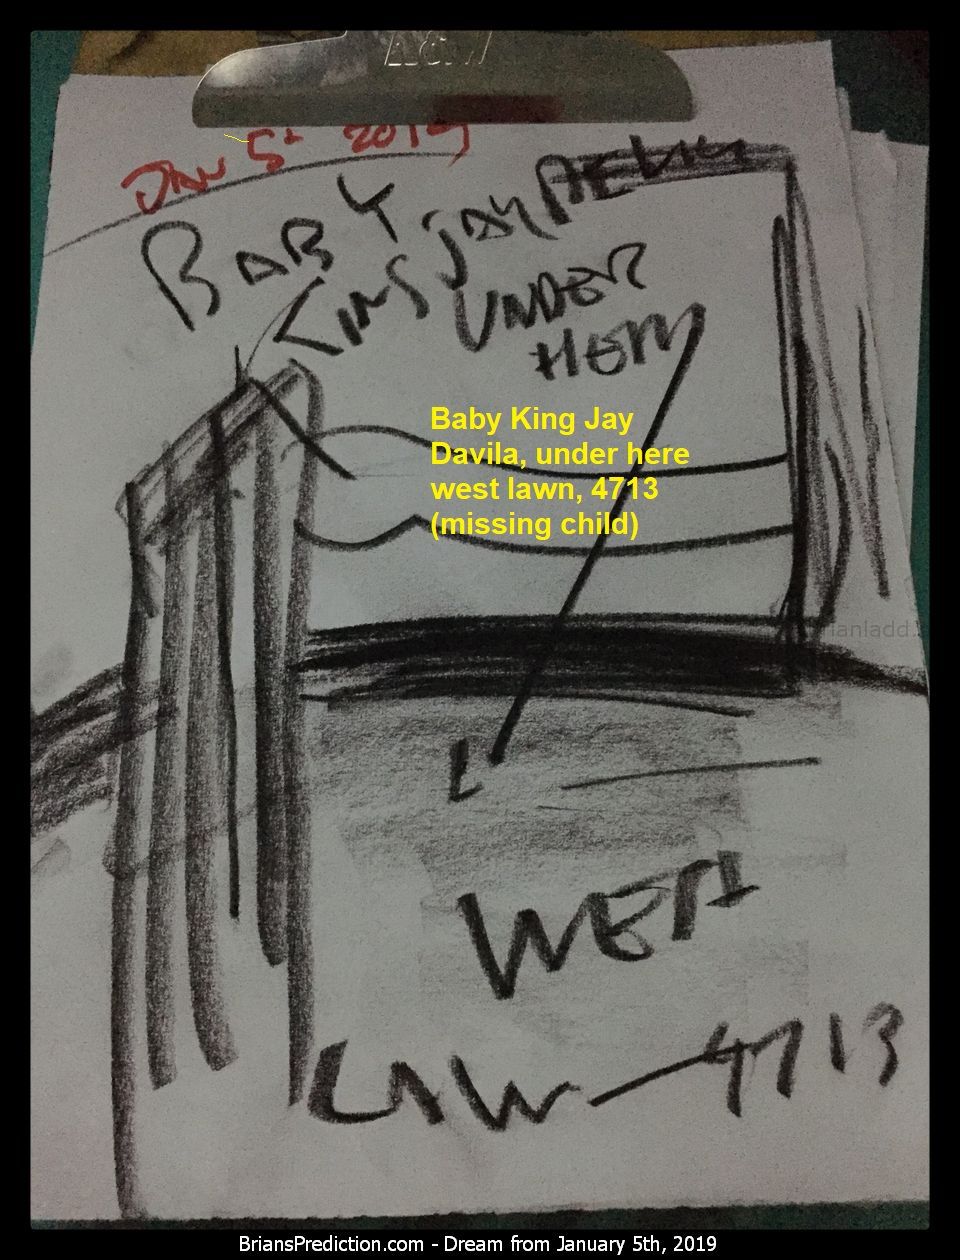 Baby King Jay Davila 11538 5 January 2019 3 - Baby King Jay Davila, Under Here West Lawn, 4713 (missing Child)  Psychic ...
Baby King Jay Davila, Under Here West Lawn, 4713 (missing Child)  Psychic Brian Ladd Uses His Visions, Dreams To Accurately Predict Future Events. His On-Line Dream Diary Contains Over 8,000 Documented Dreams, Lucid Dreams And Remote Viewing Cases. To Date, Over 3,000 Predictions Have Come True, With More And More Every Day. Brian Has Personally Worked Hundred Missing Person Cases Since 2006 With A Success Rate Of Around 45%. Brian Served 12 Active Years In The Us Army And Then Joined The Army Reserves. Brian Was Diagnosed With Schizoaffective Disorder In 2011, And Some Say This 'illness' Maybe The Reason Why So Many Of His Dreams Have Come True.
